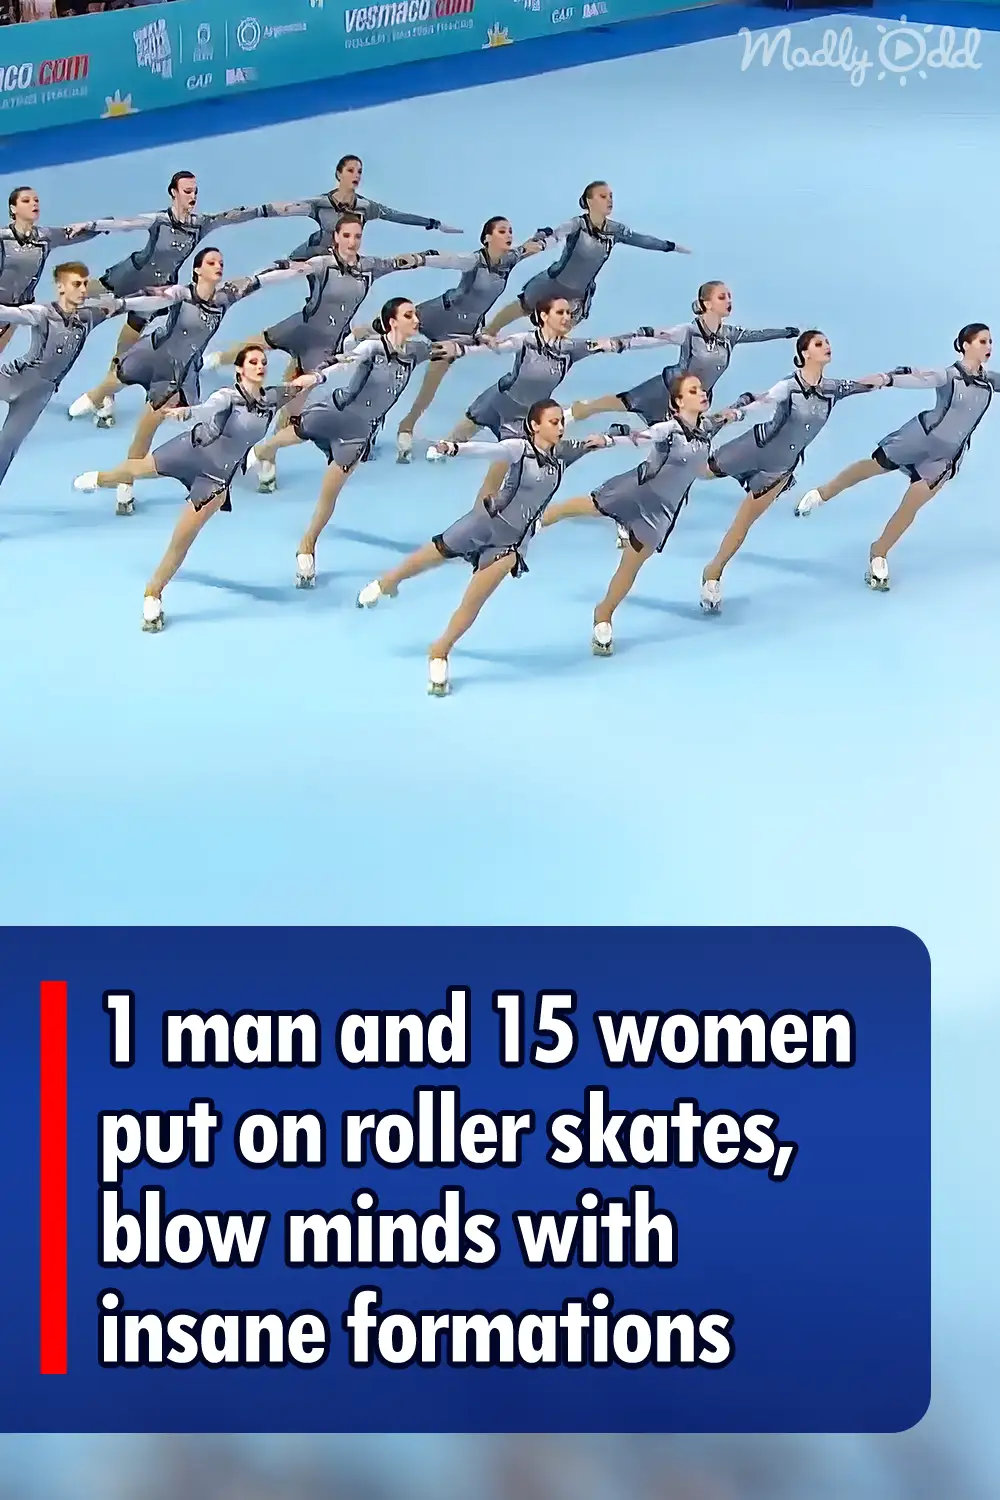 1 man and 15 women put on roller skates, blow minds with insane formations